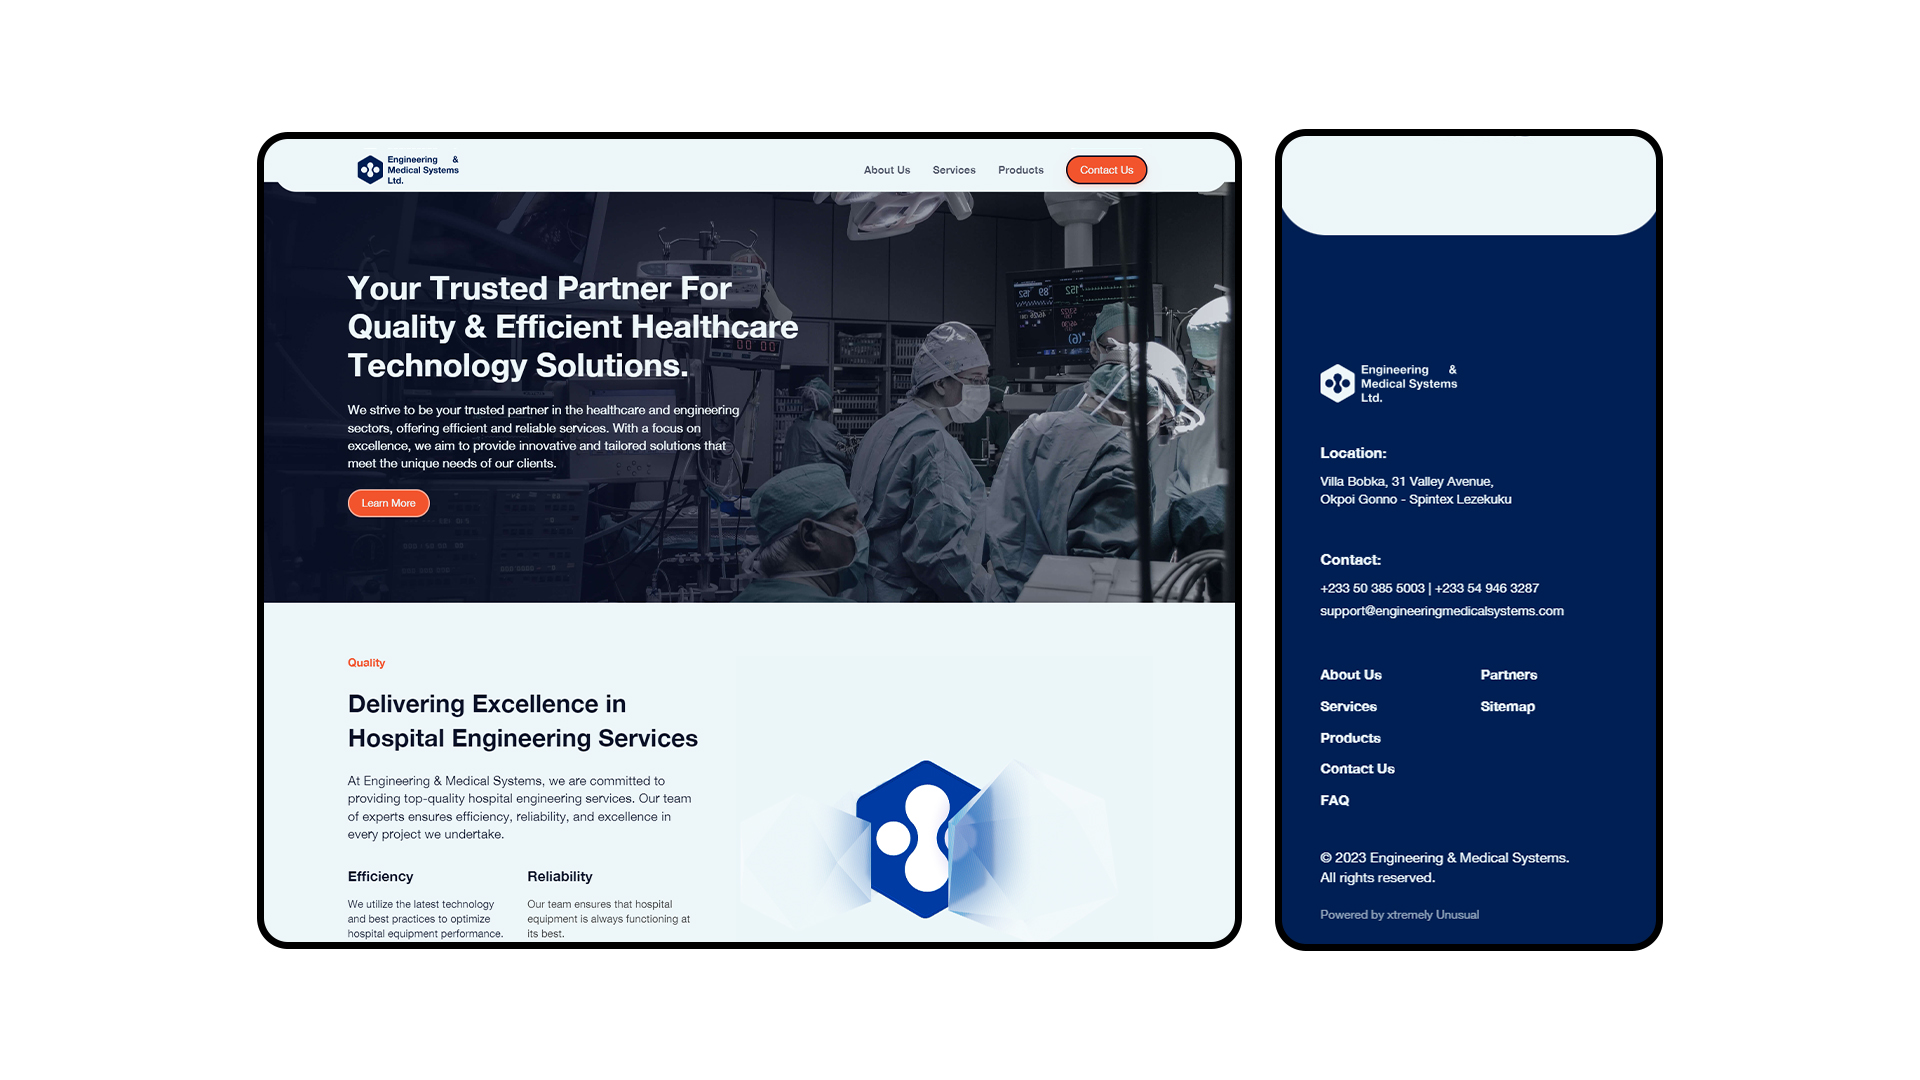 Engineering the Future of Healthcare – Brand Identity and Website for EMS Engineering & Medical Systems by xtremely Unusual